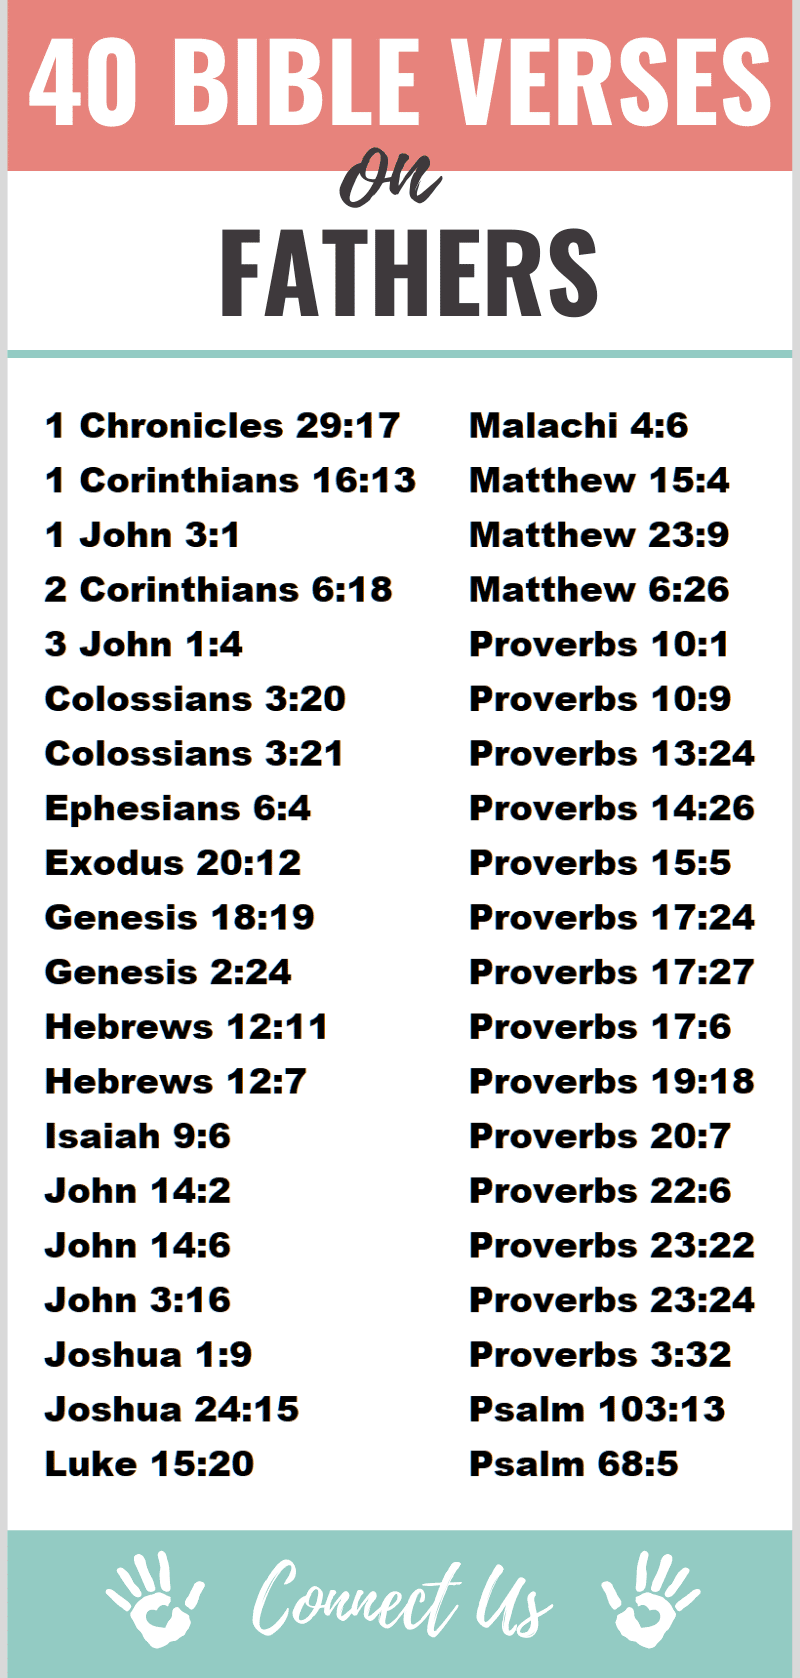 Bible Verses on Fathers